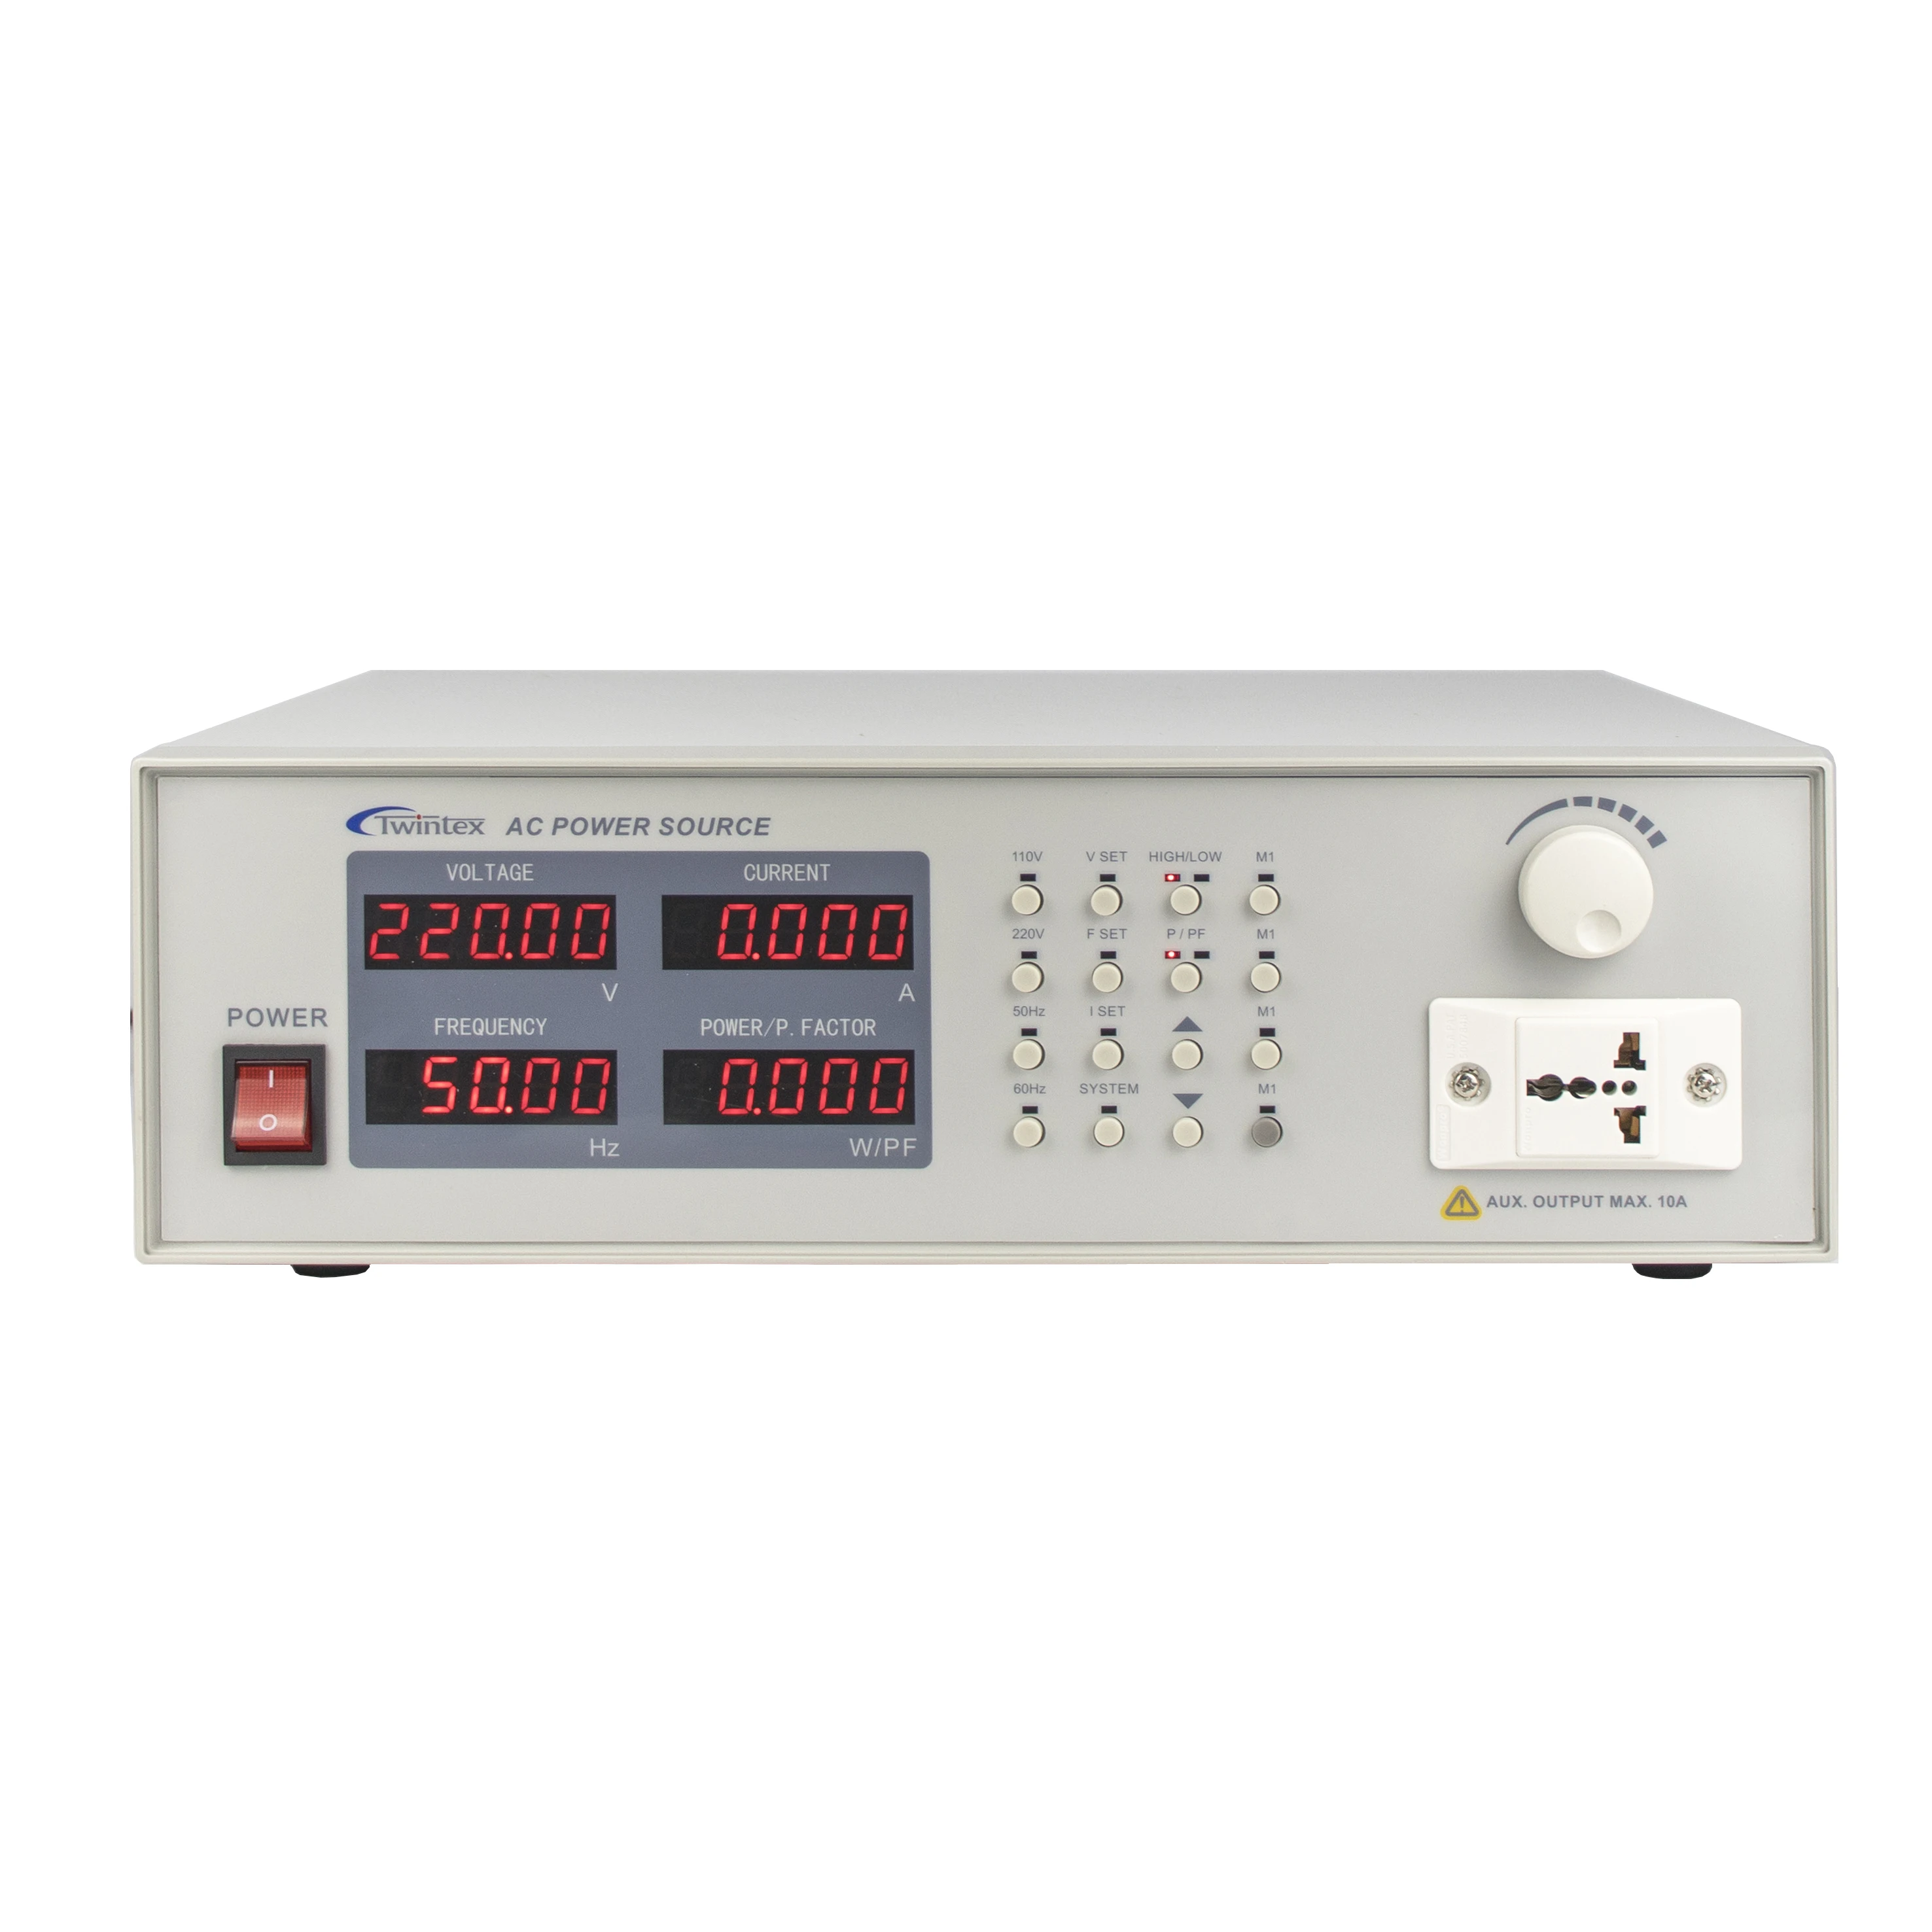 Wholesale AC Power Supply APS-51005 Programmable Laboratory Variable Frequency Converter AC Power Source From m.alibaba.com